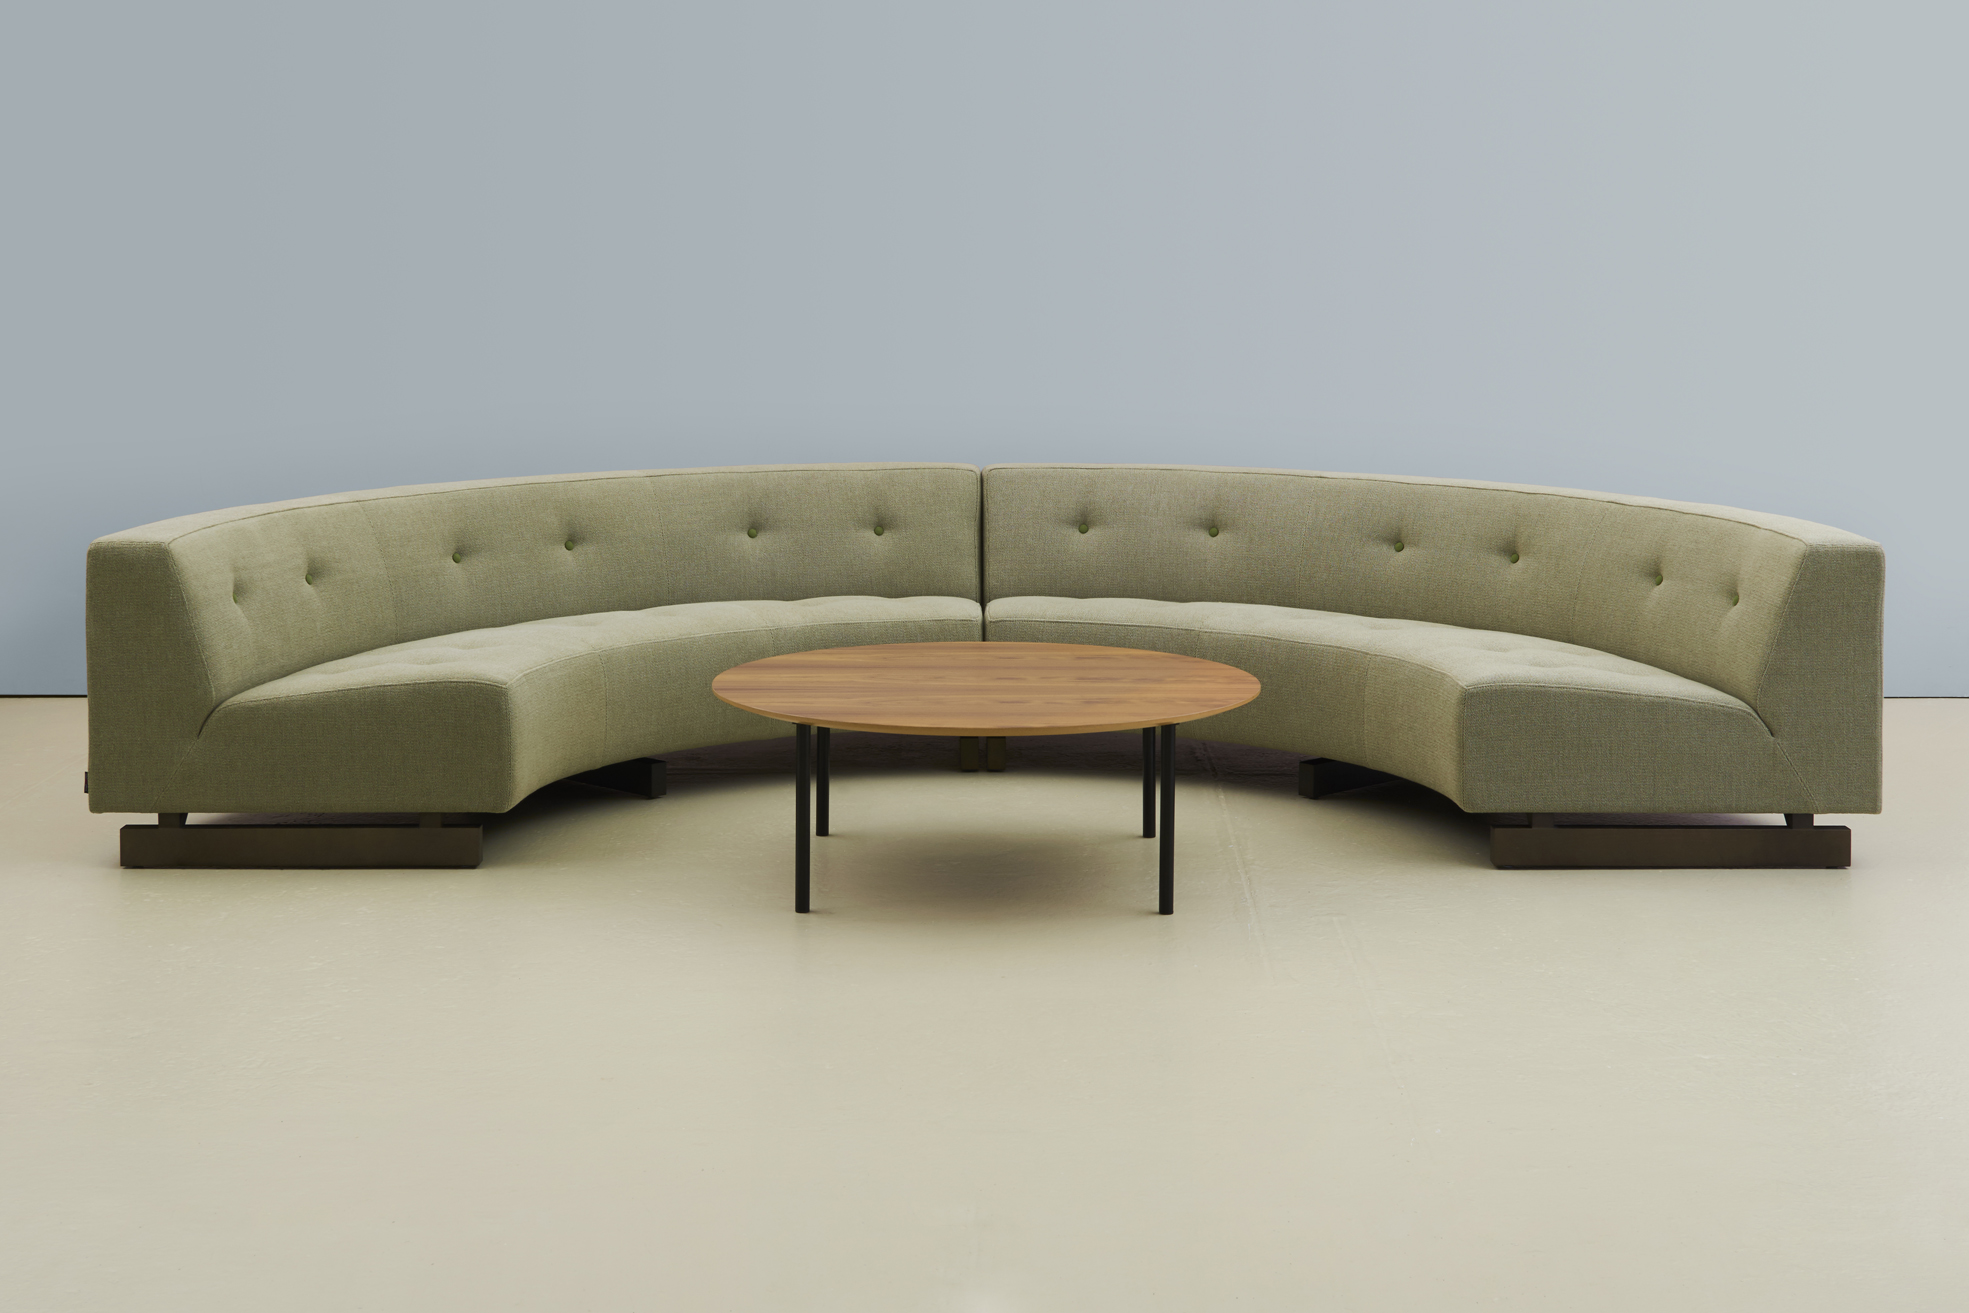 hm46v1 curved sofa with hm18z table (4) (low res).jpg